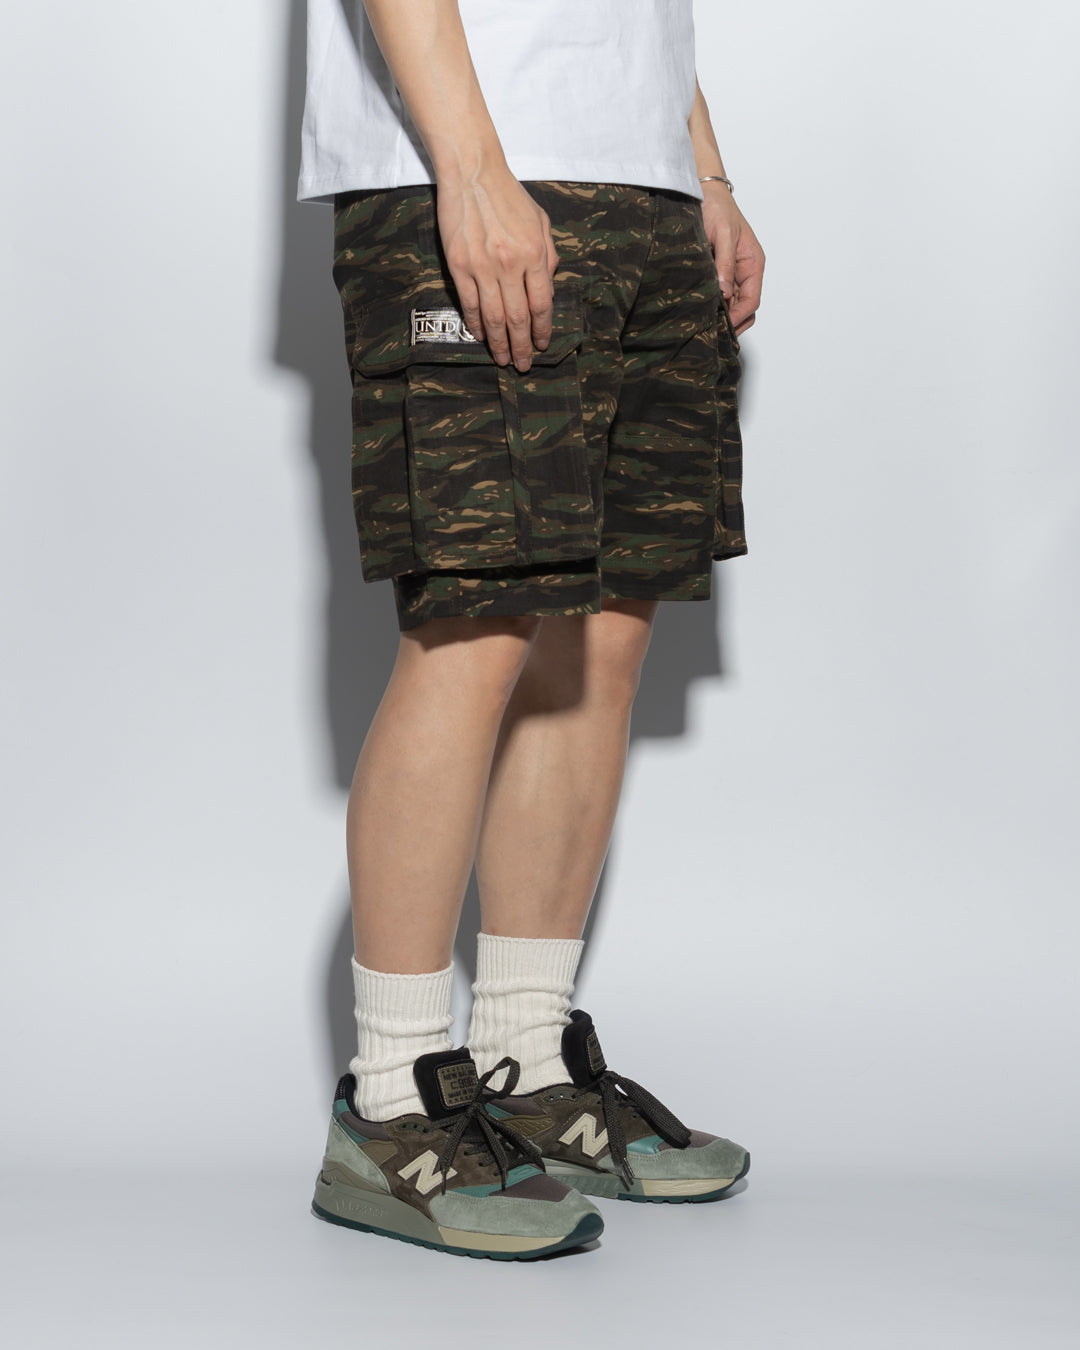 SG00T1 | DOUBLE FIRE ARMY SHORTS-SHORTS-UNTOUCHED UNITED